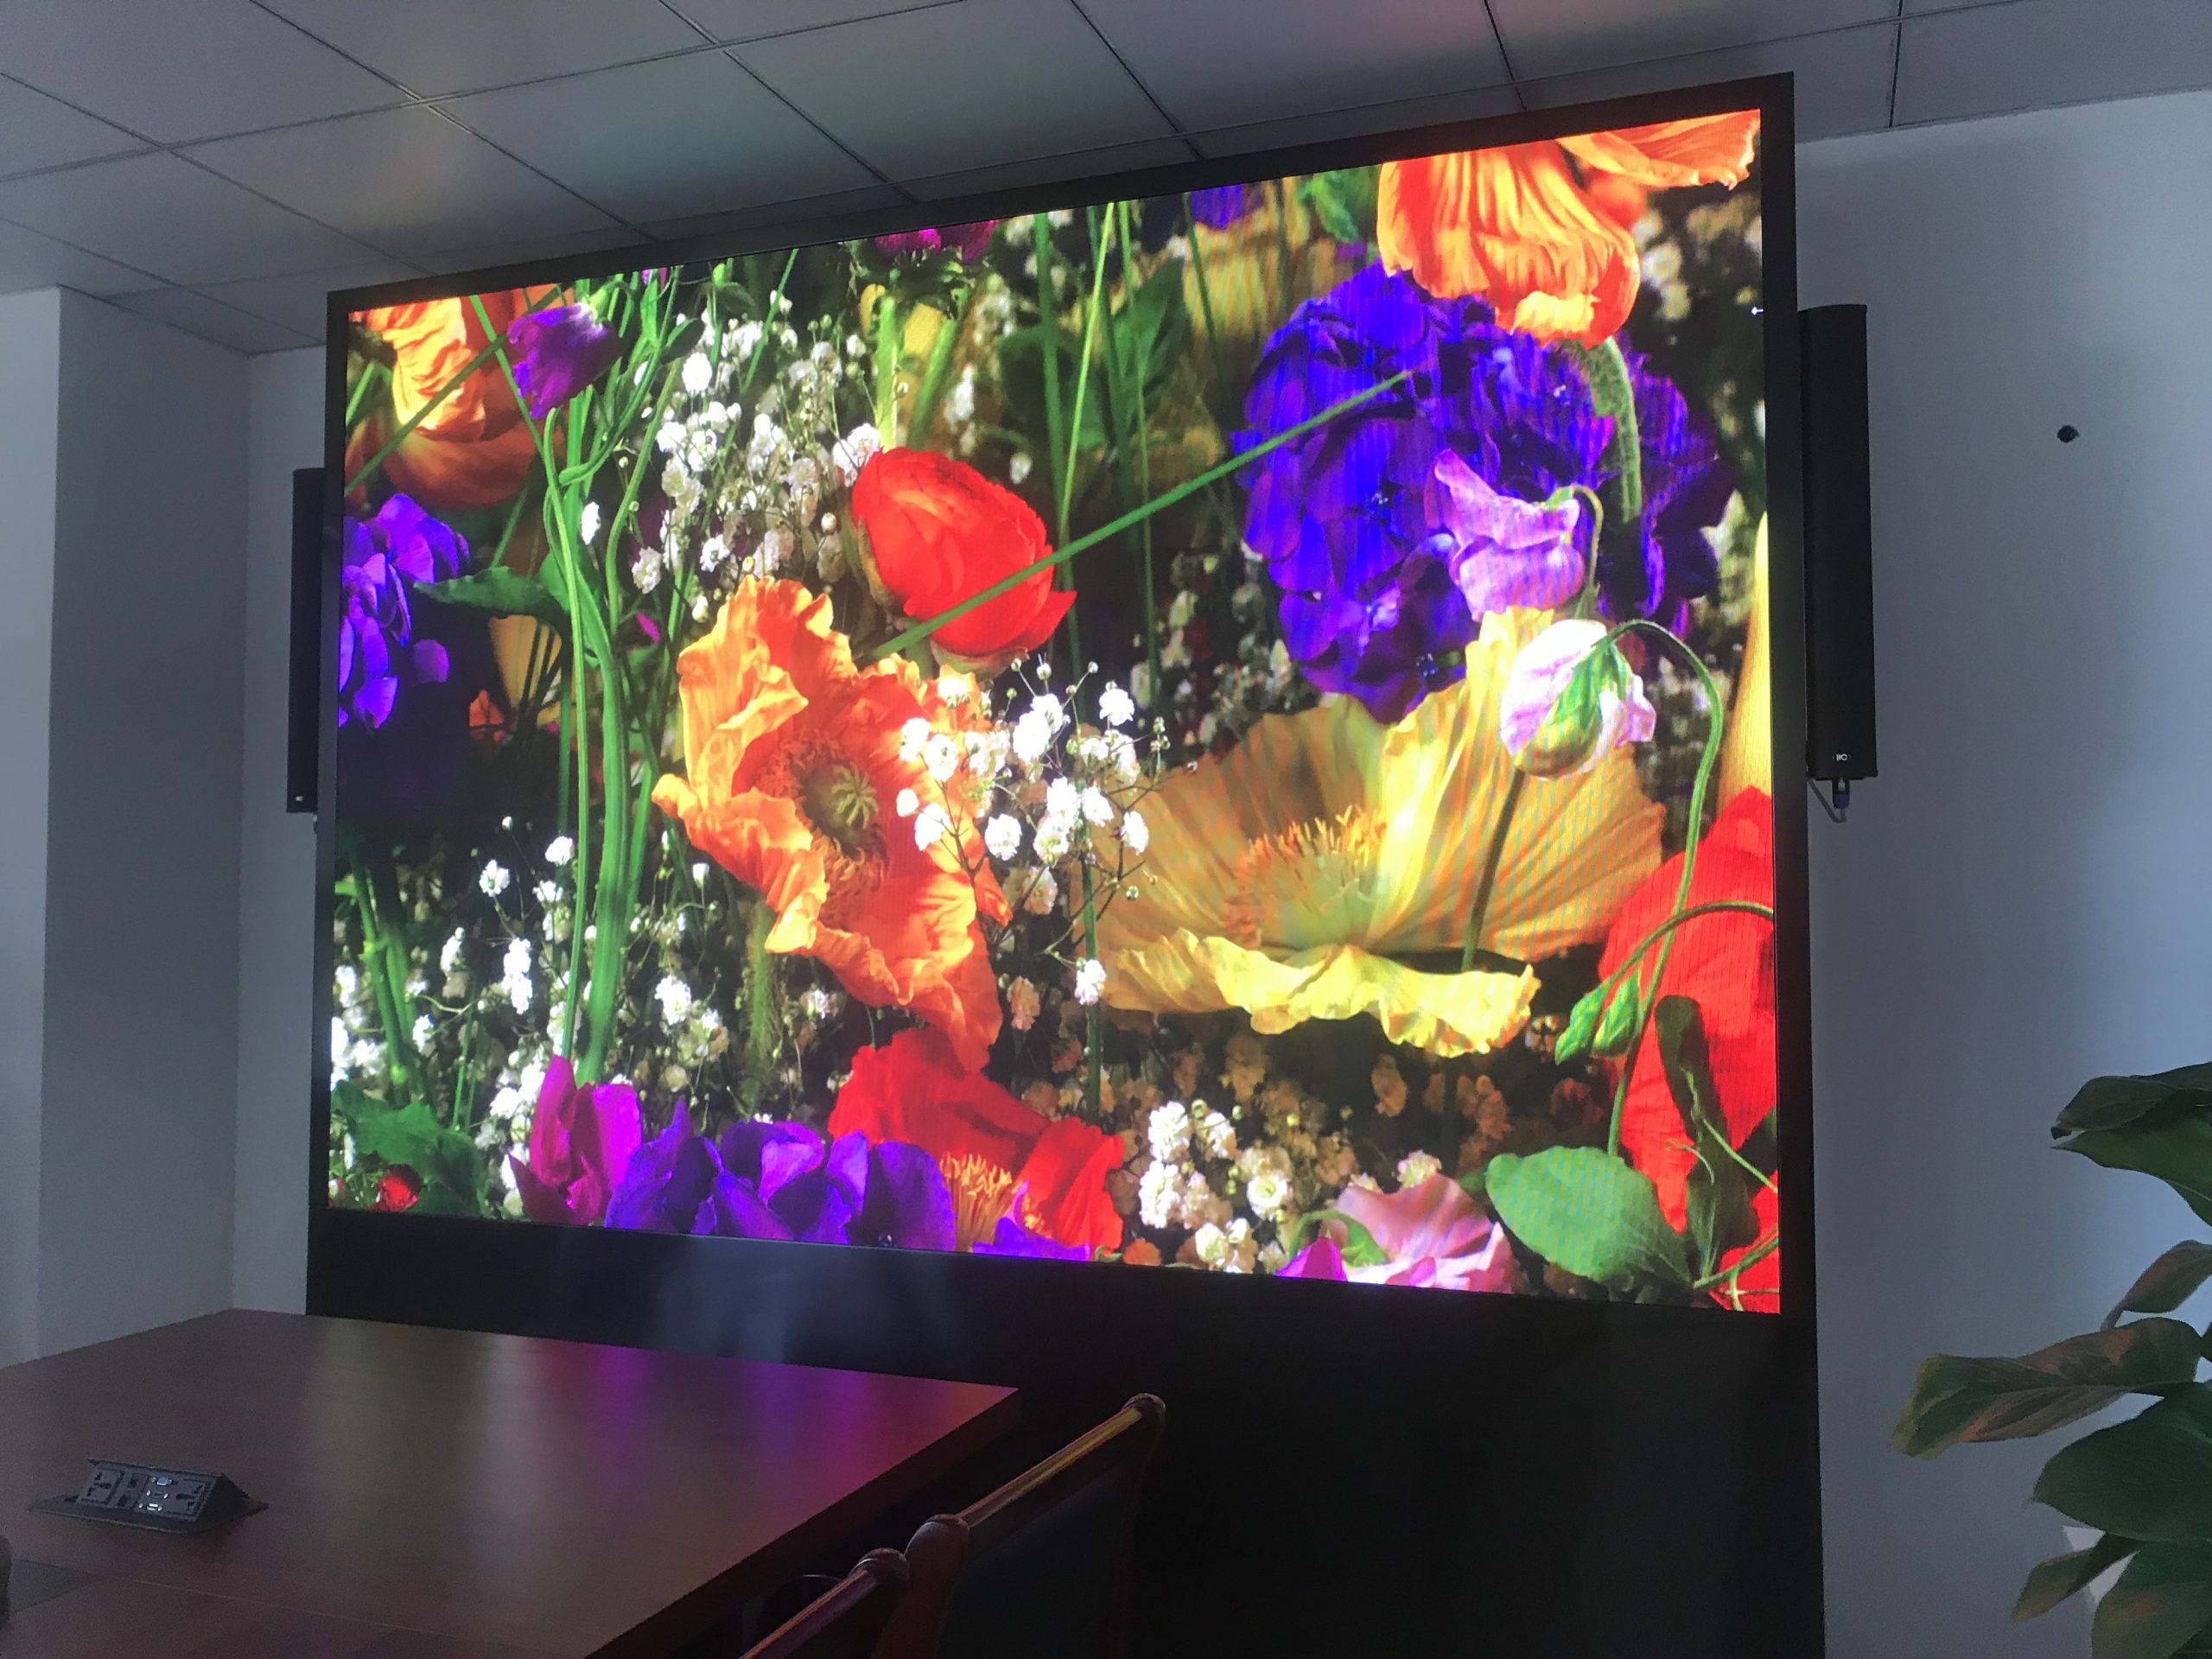 What packaging technologies are available for small-pitch LED displays?